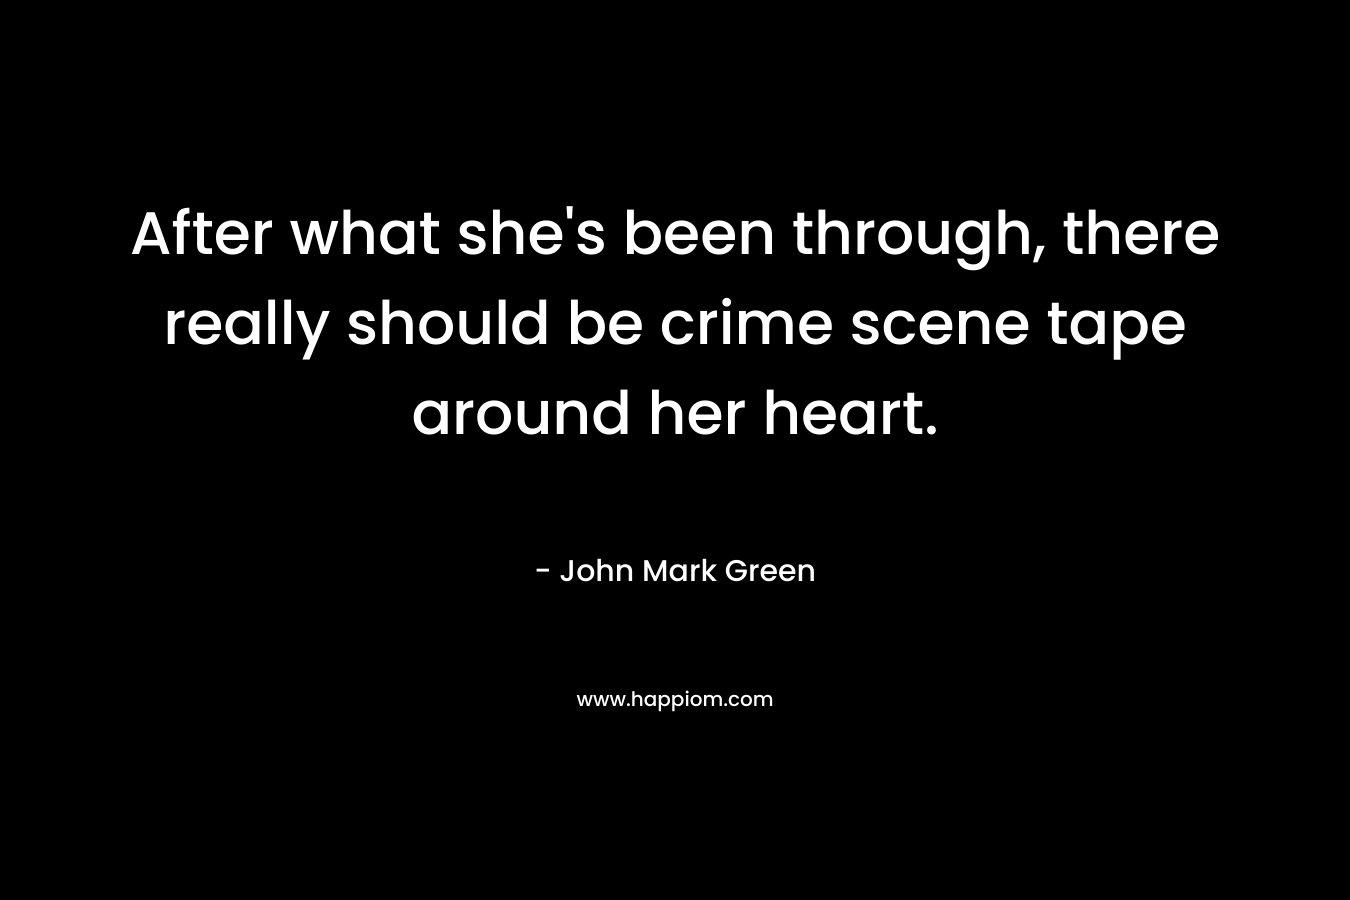 After what she's been through, there really should be crime scene tape around her heart.